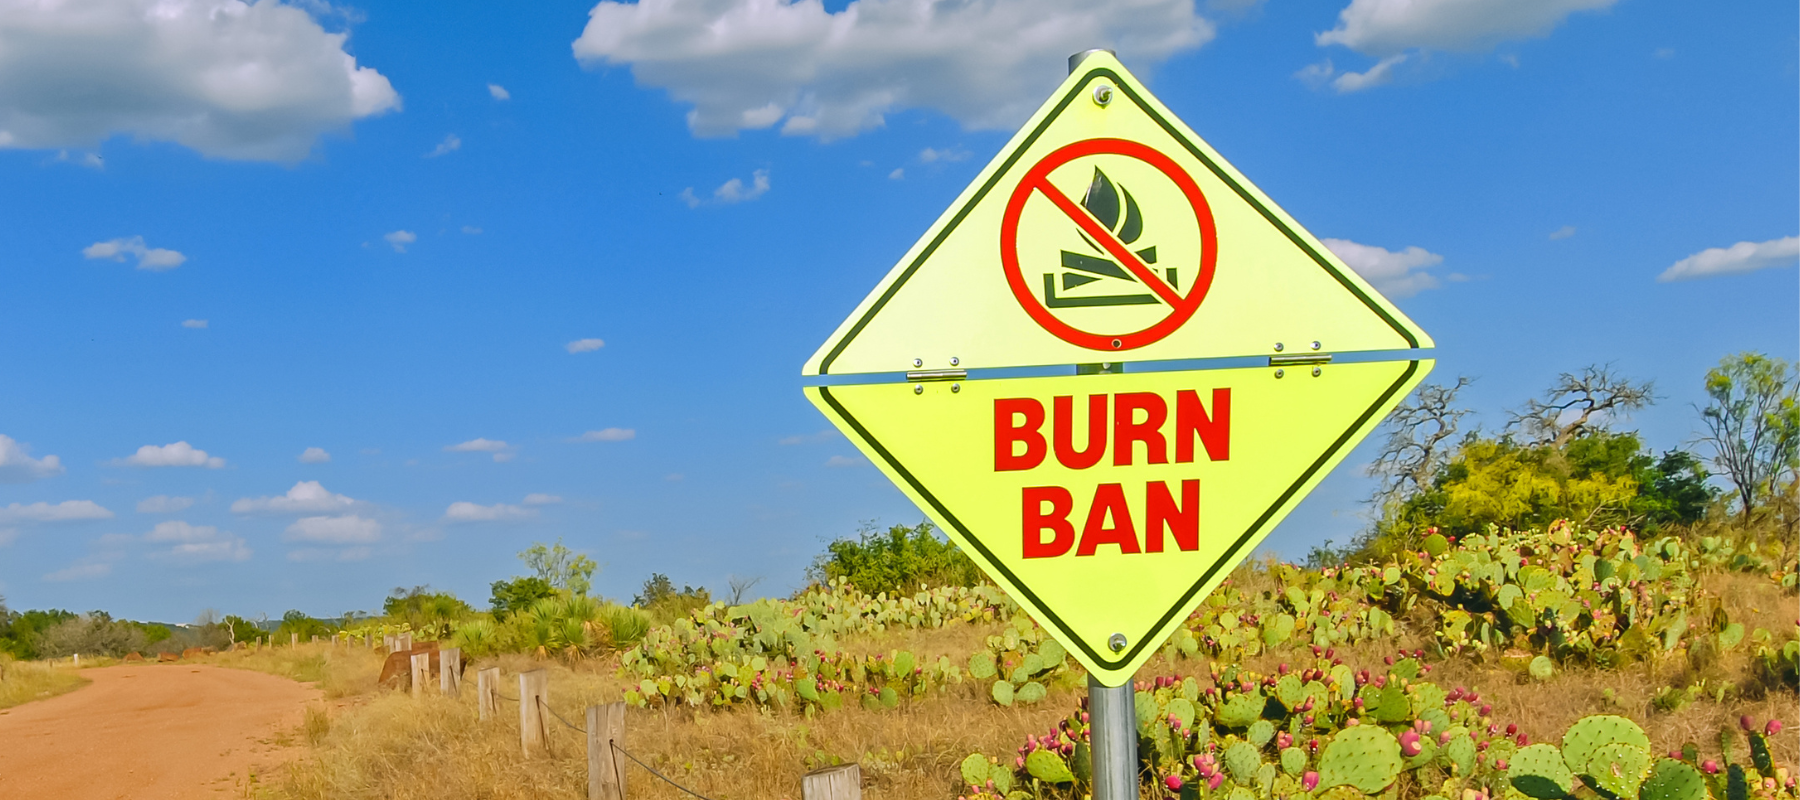 Fencing options during burn bans and excessively hot days